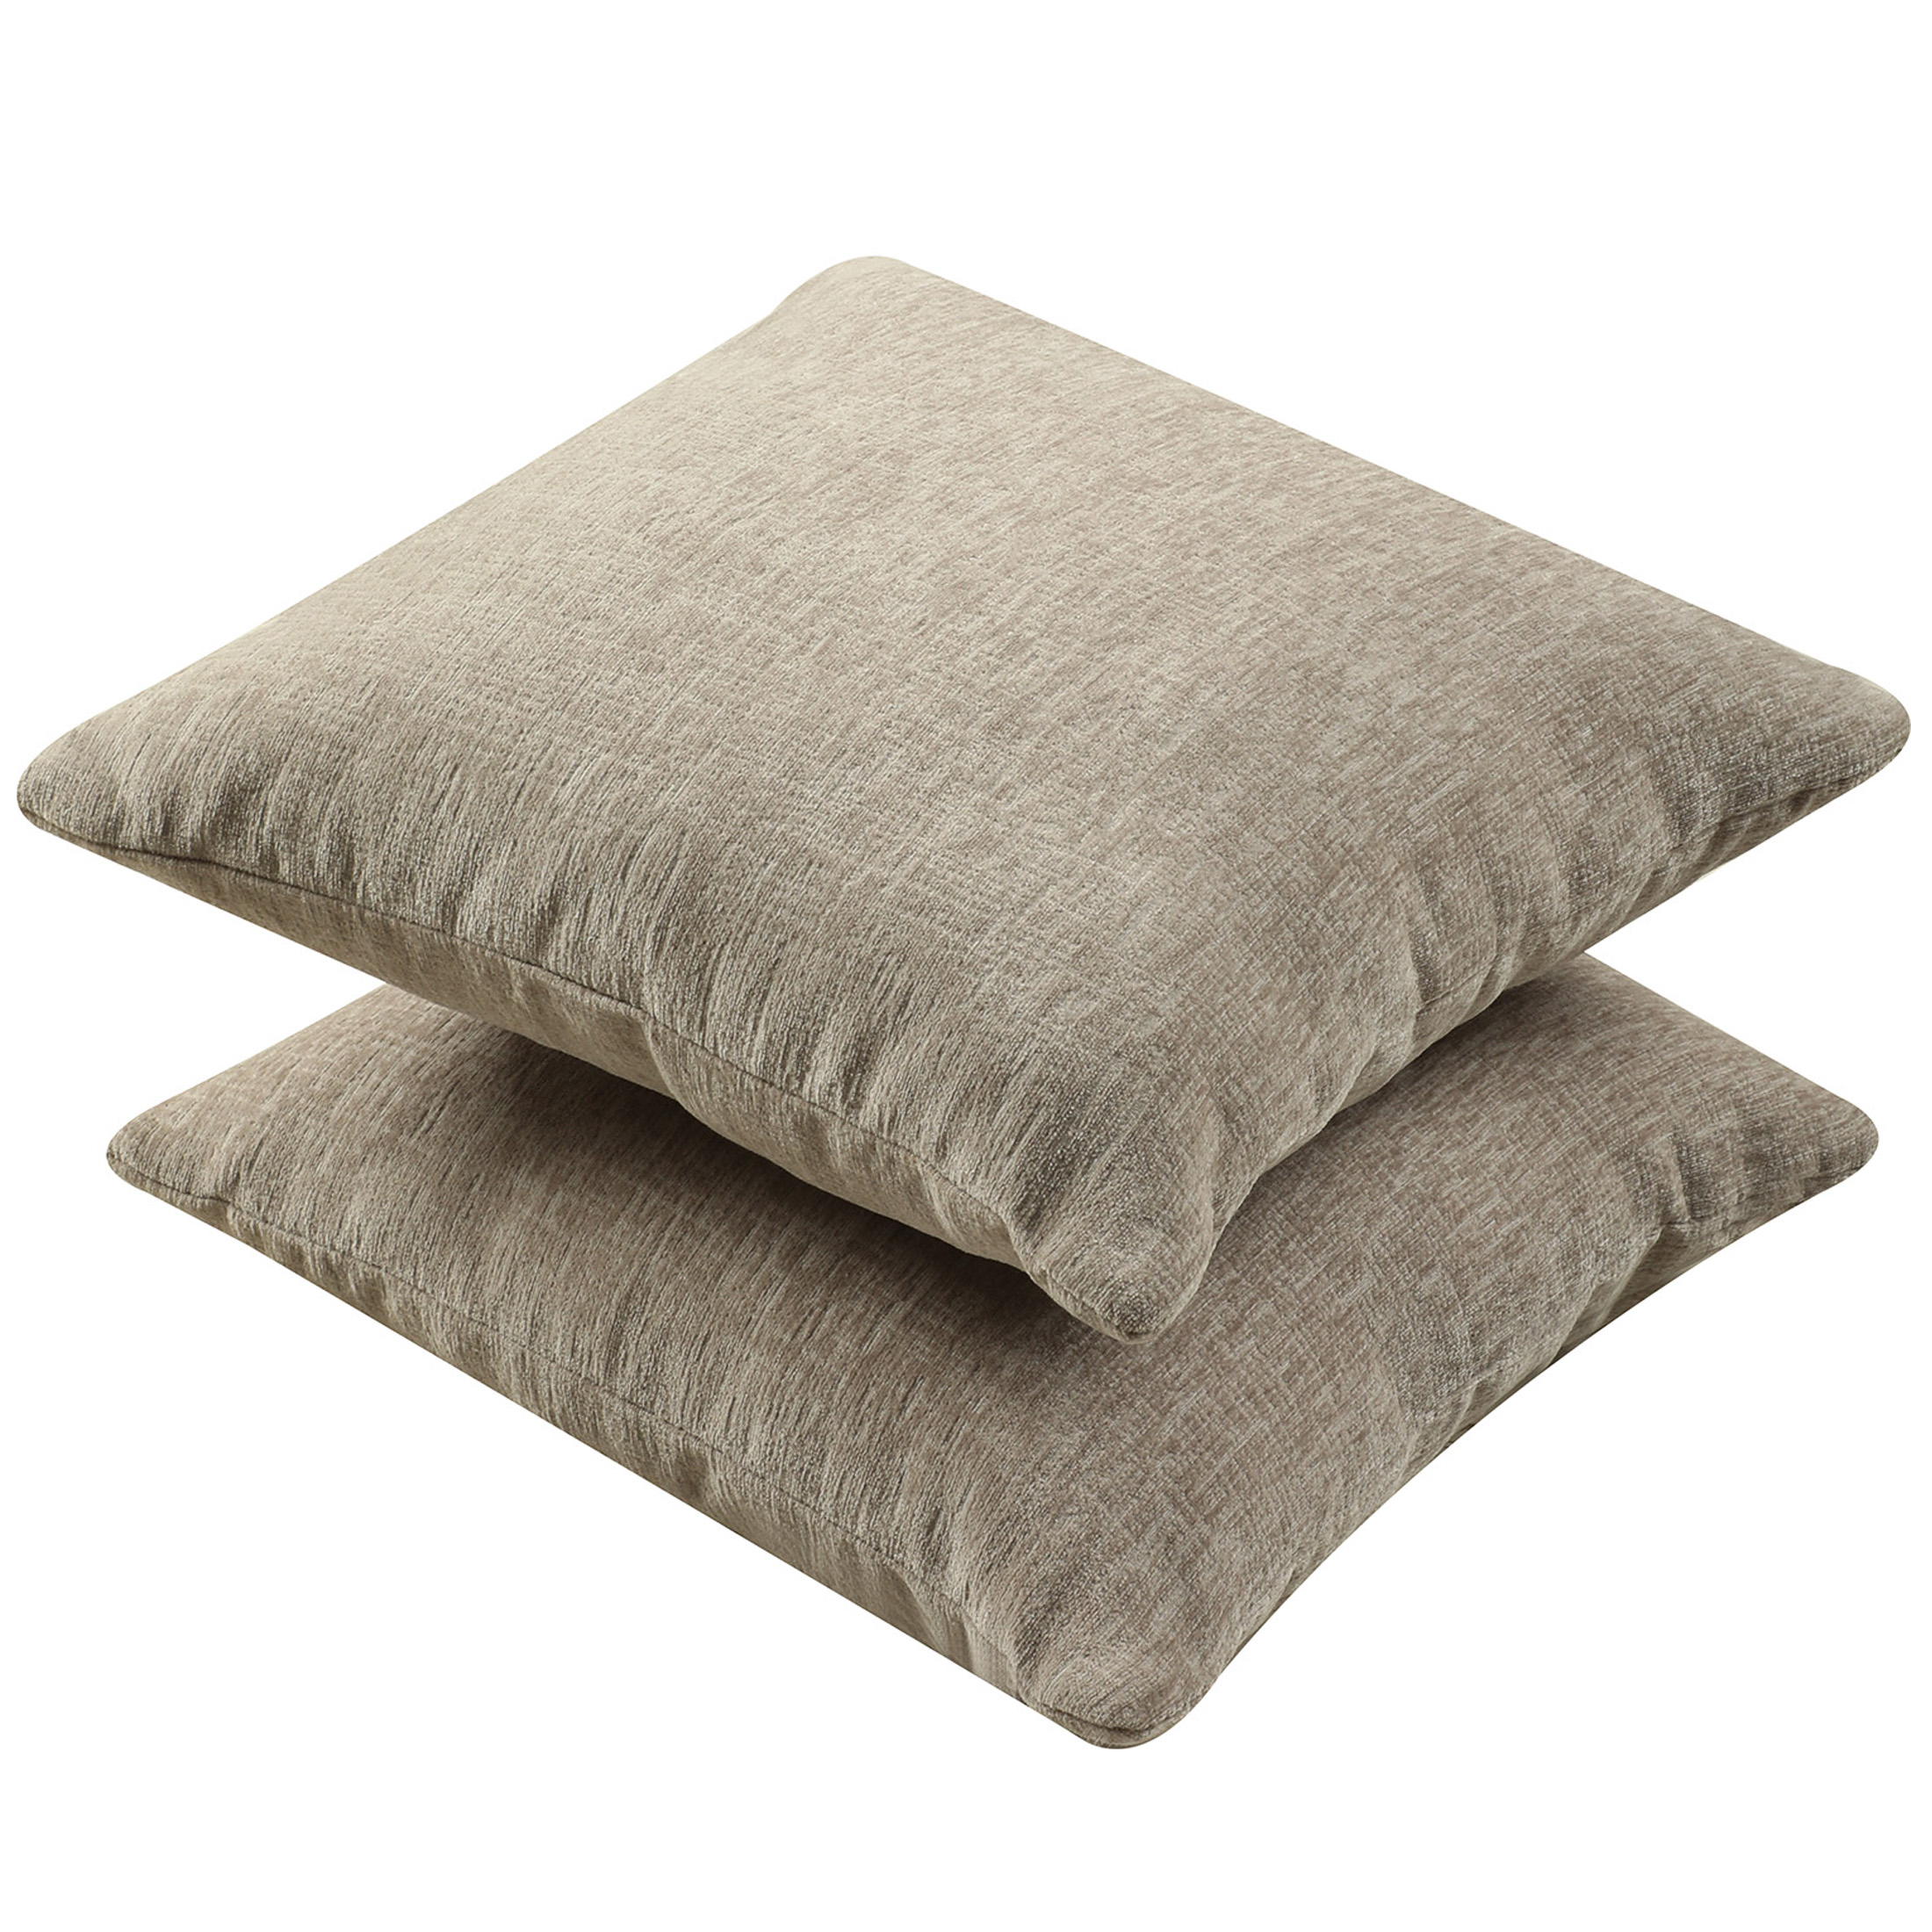 Mainstays Chenille Beige Square Pillow 18''x18'', 2 Pack - image 2 of 5